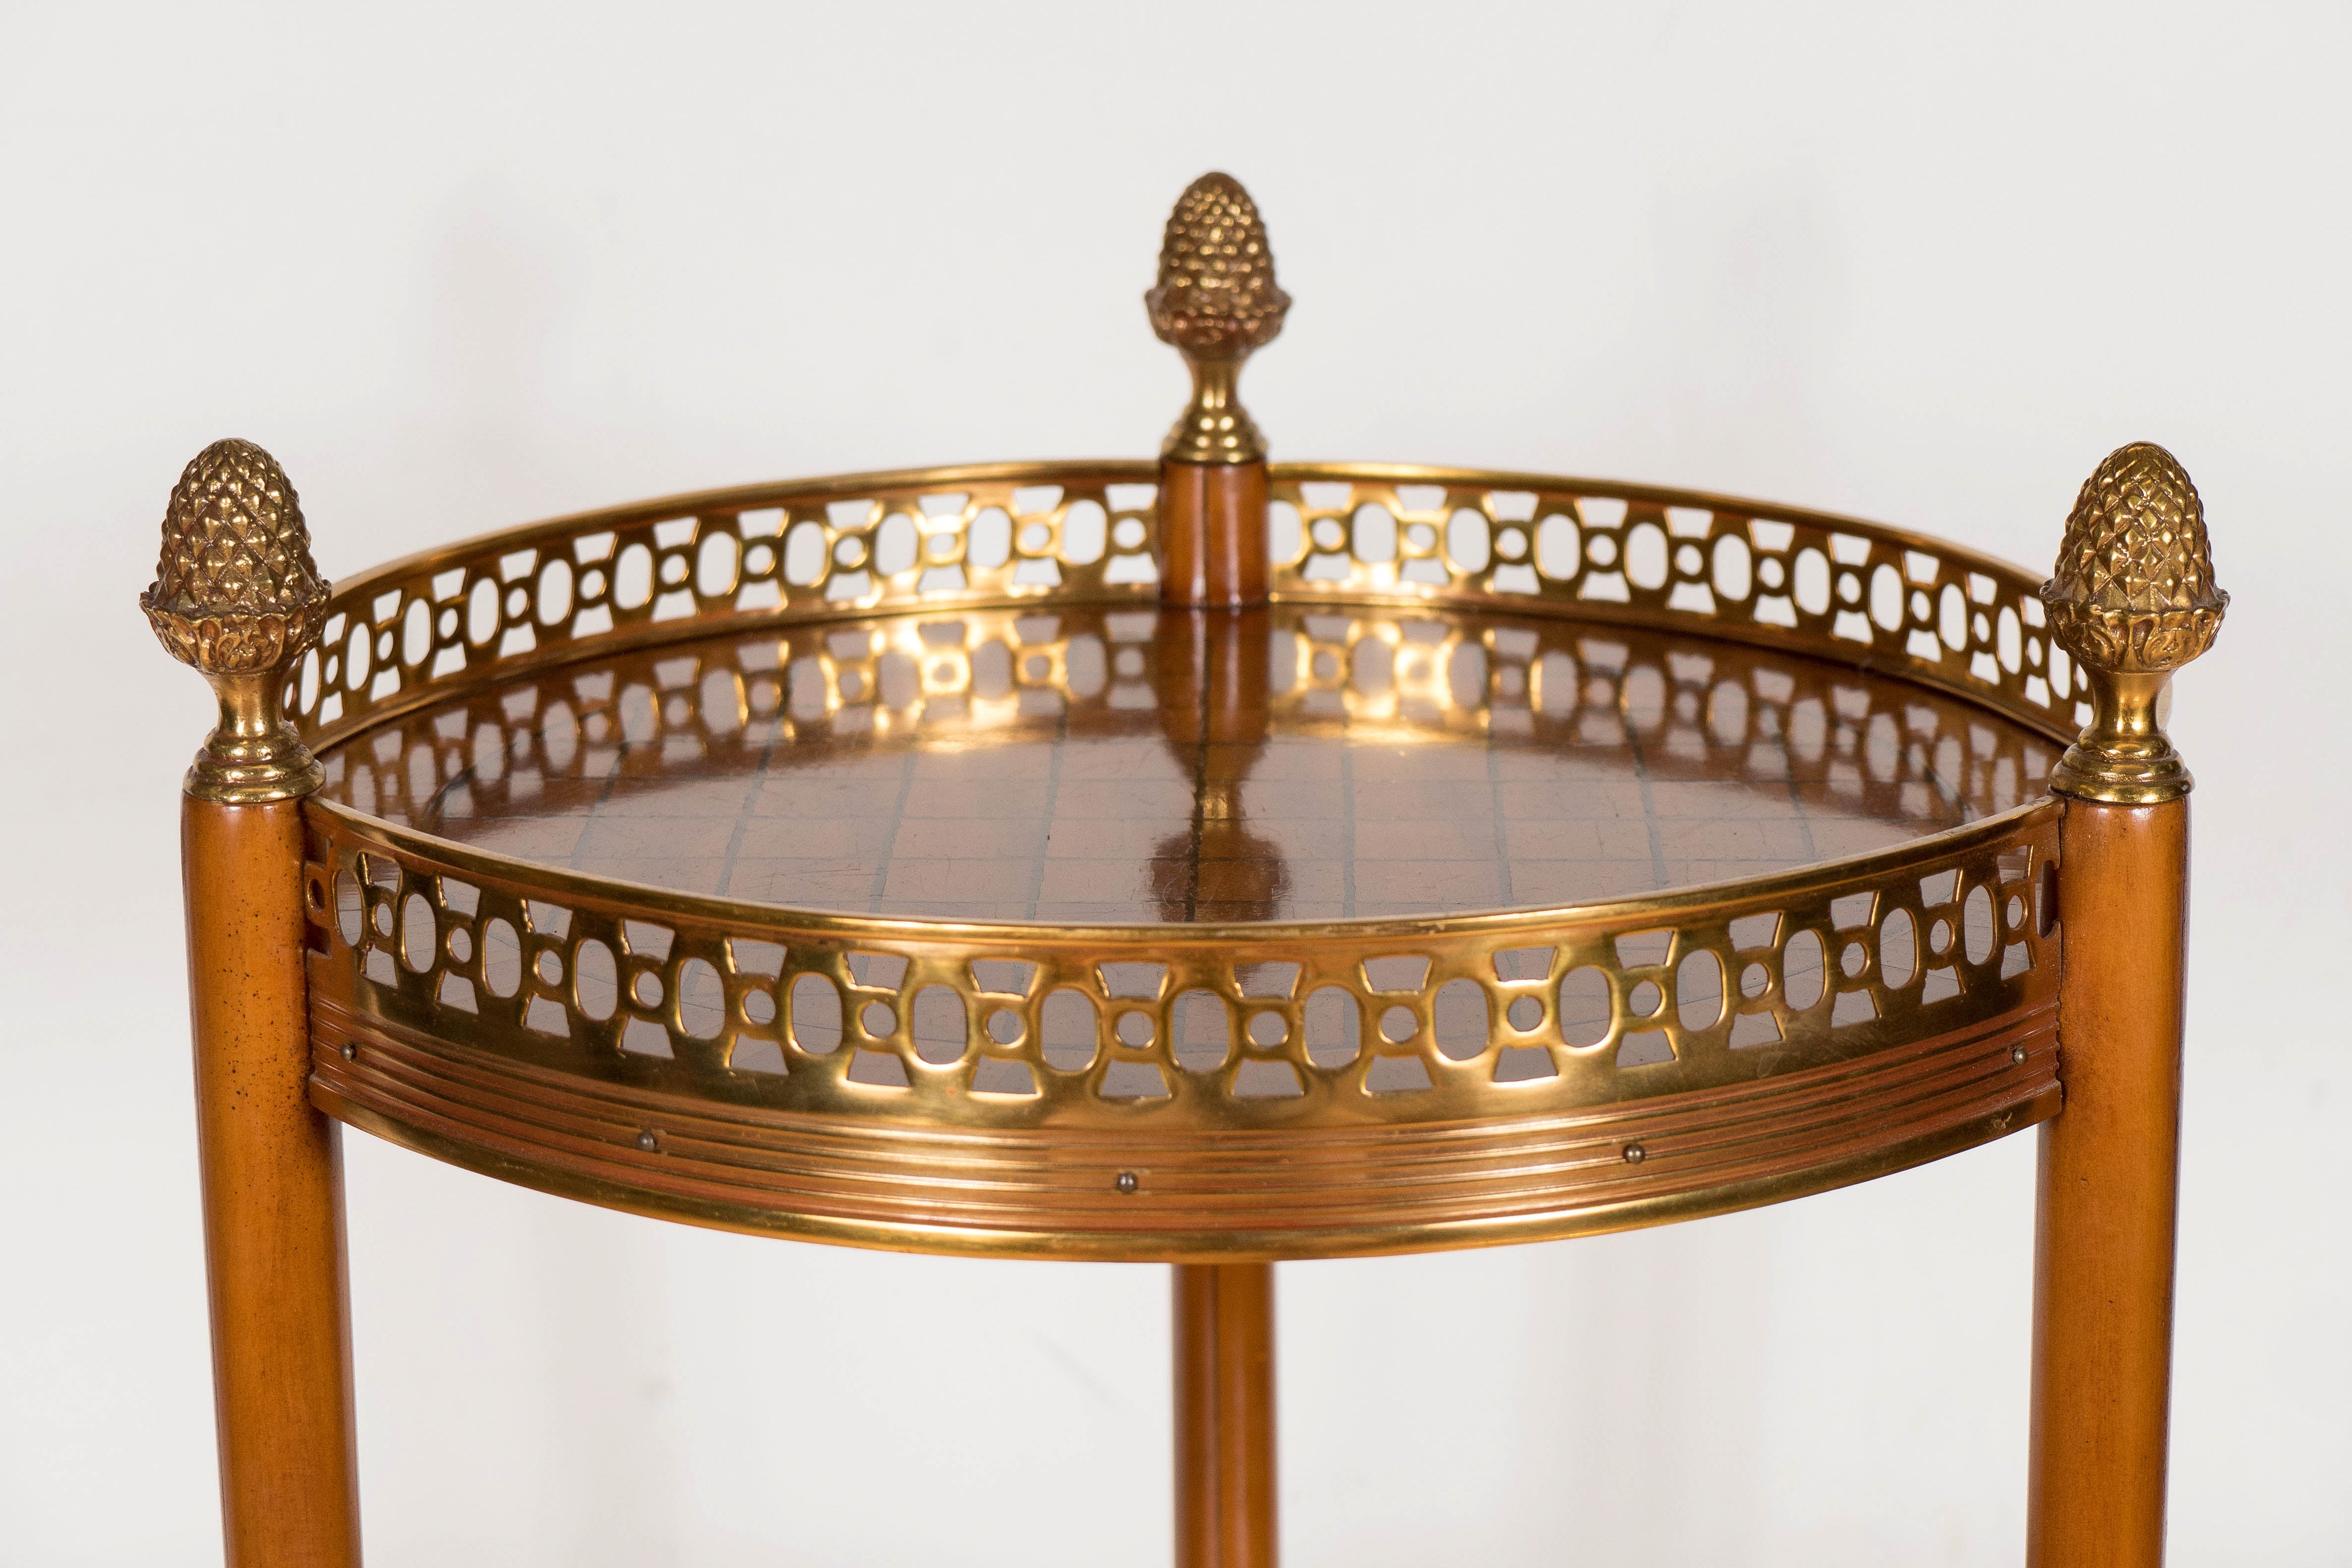 20th Century  Elegant Three-Tiered Table in Amboyna Wood with Gilded Brass Cage and Accent